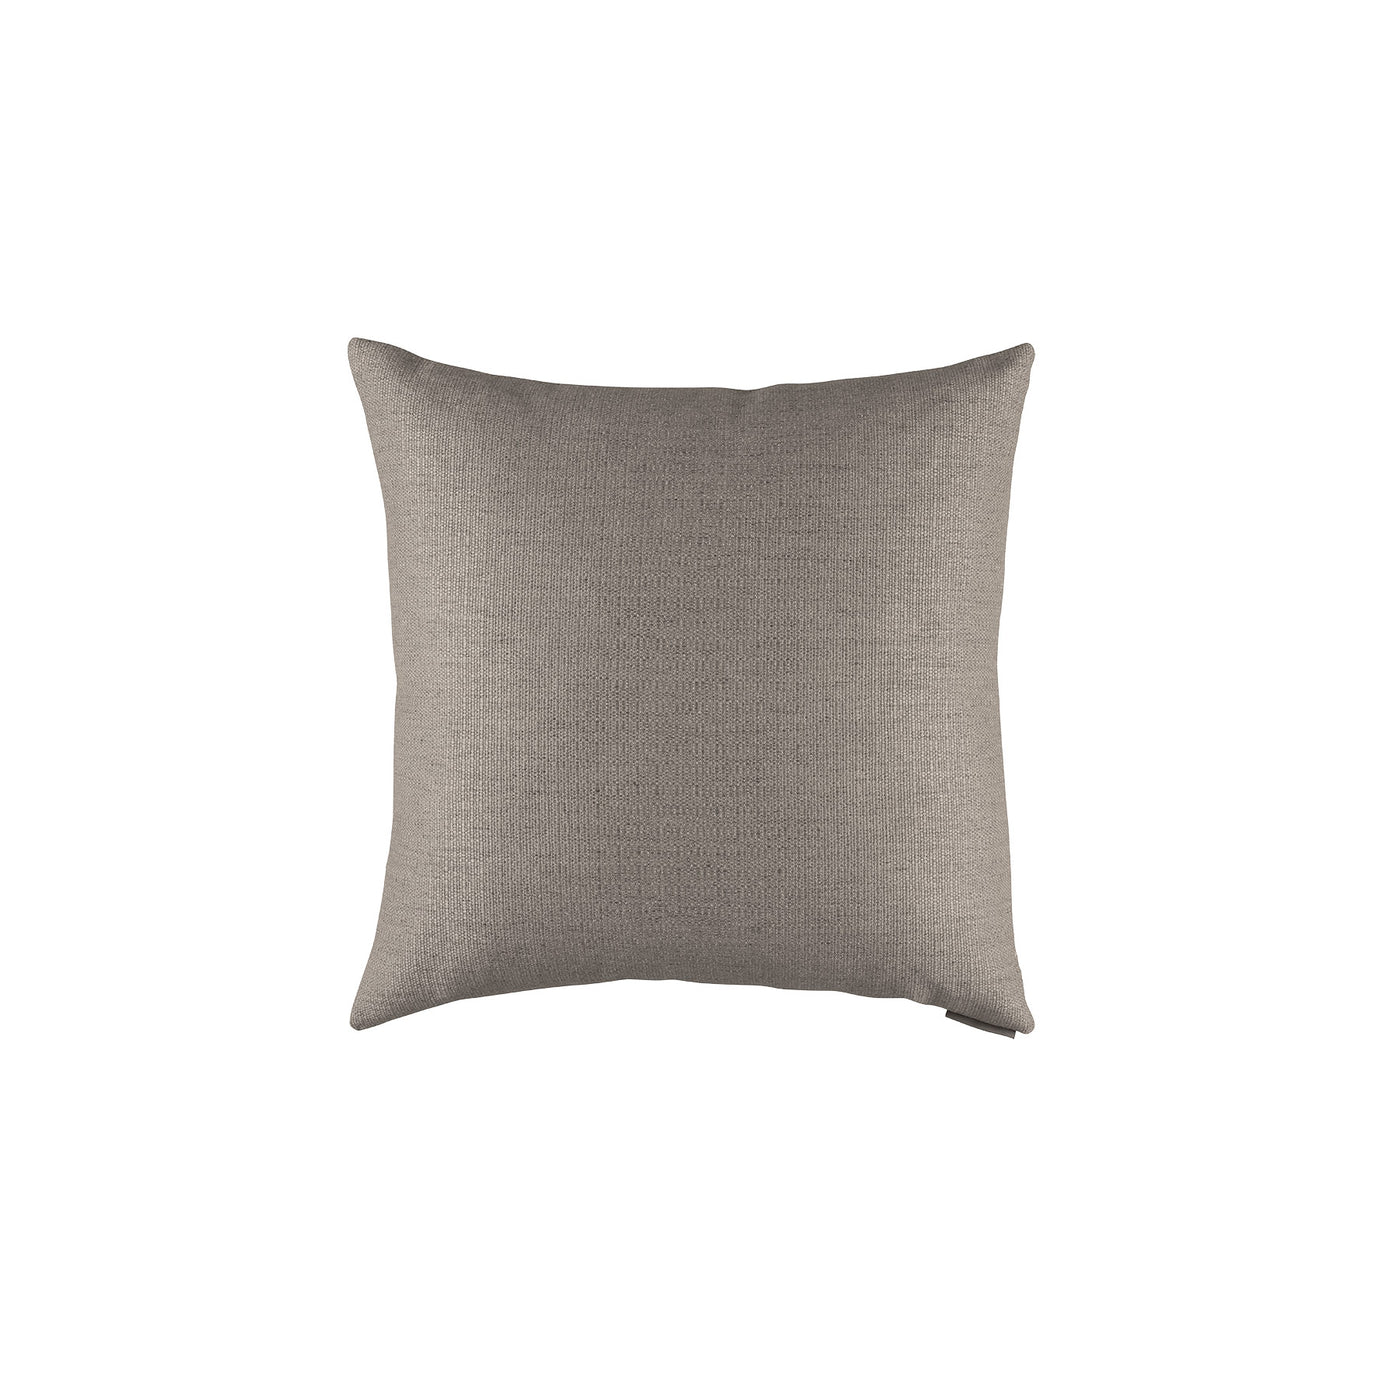 Liam Fawn Large Square Pillow (24x24)